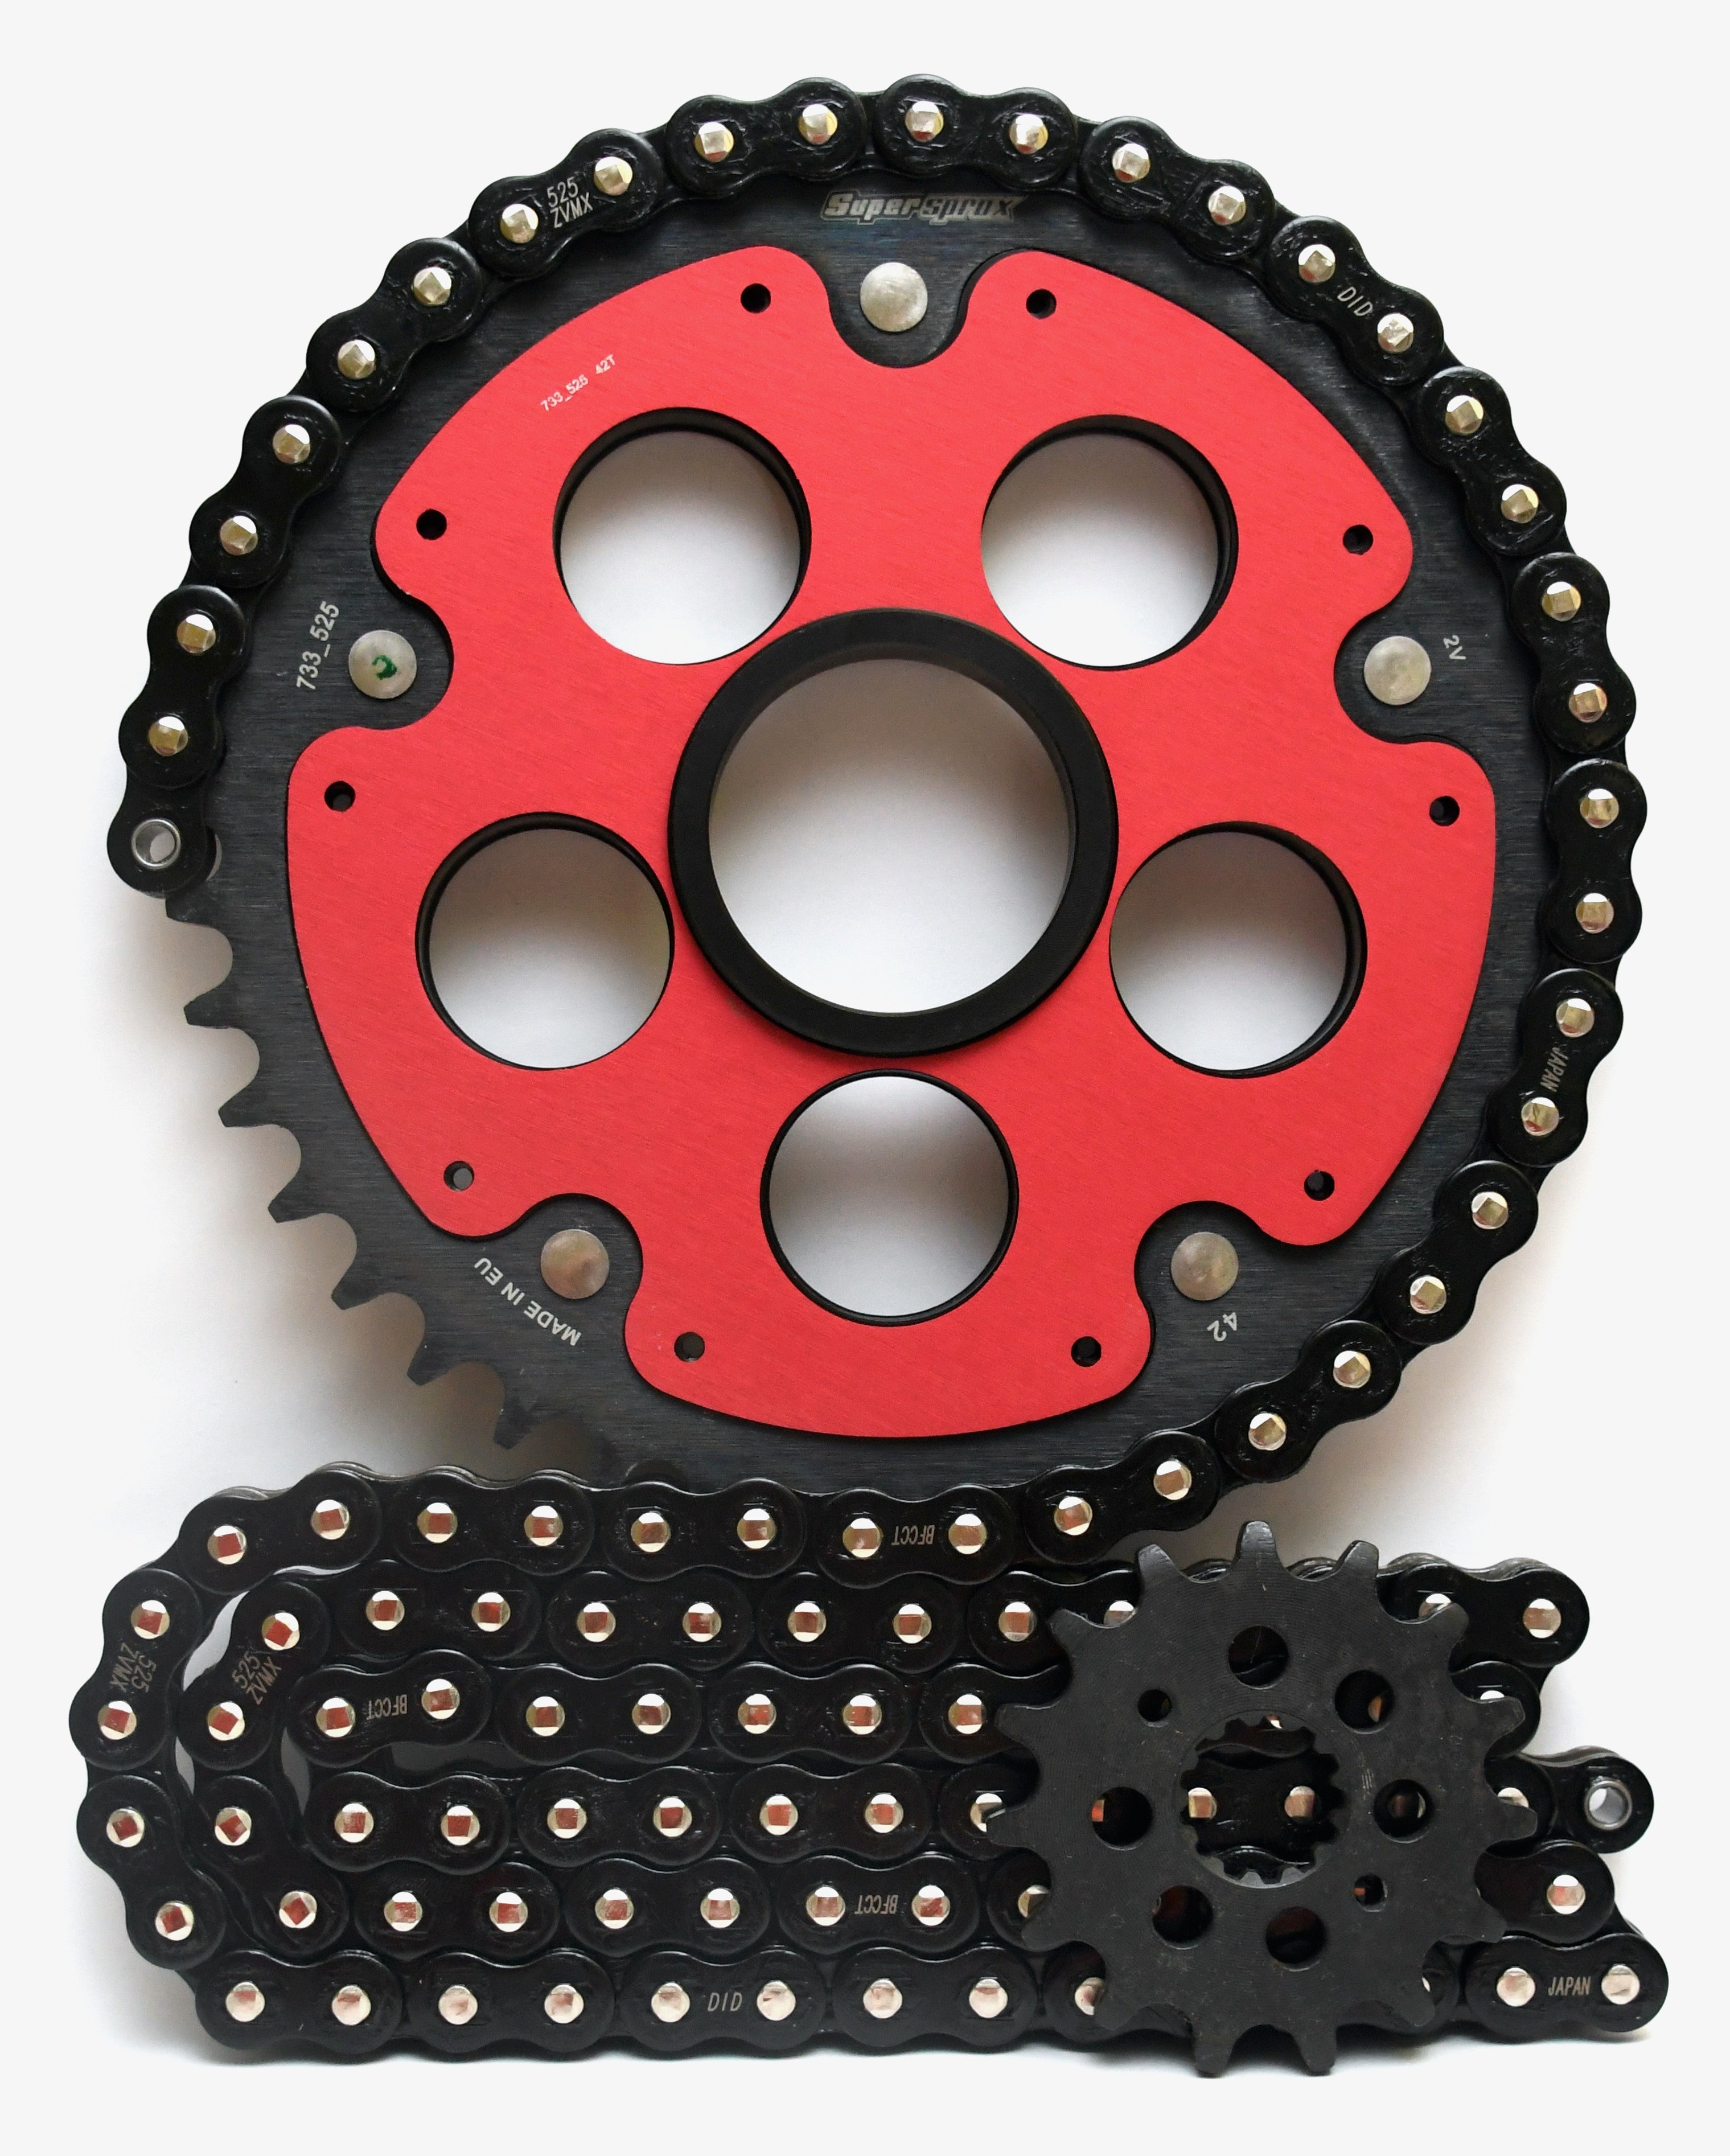 Supersprox Chain & Sprocket Kit for Ducati 796 Hypermotard 2010-2012 - Standard Gearing